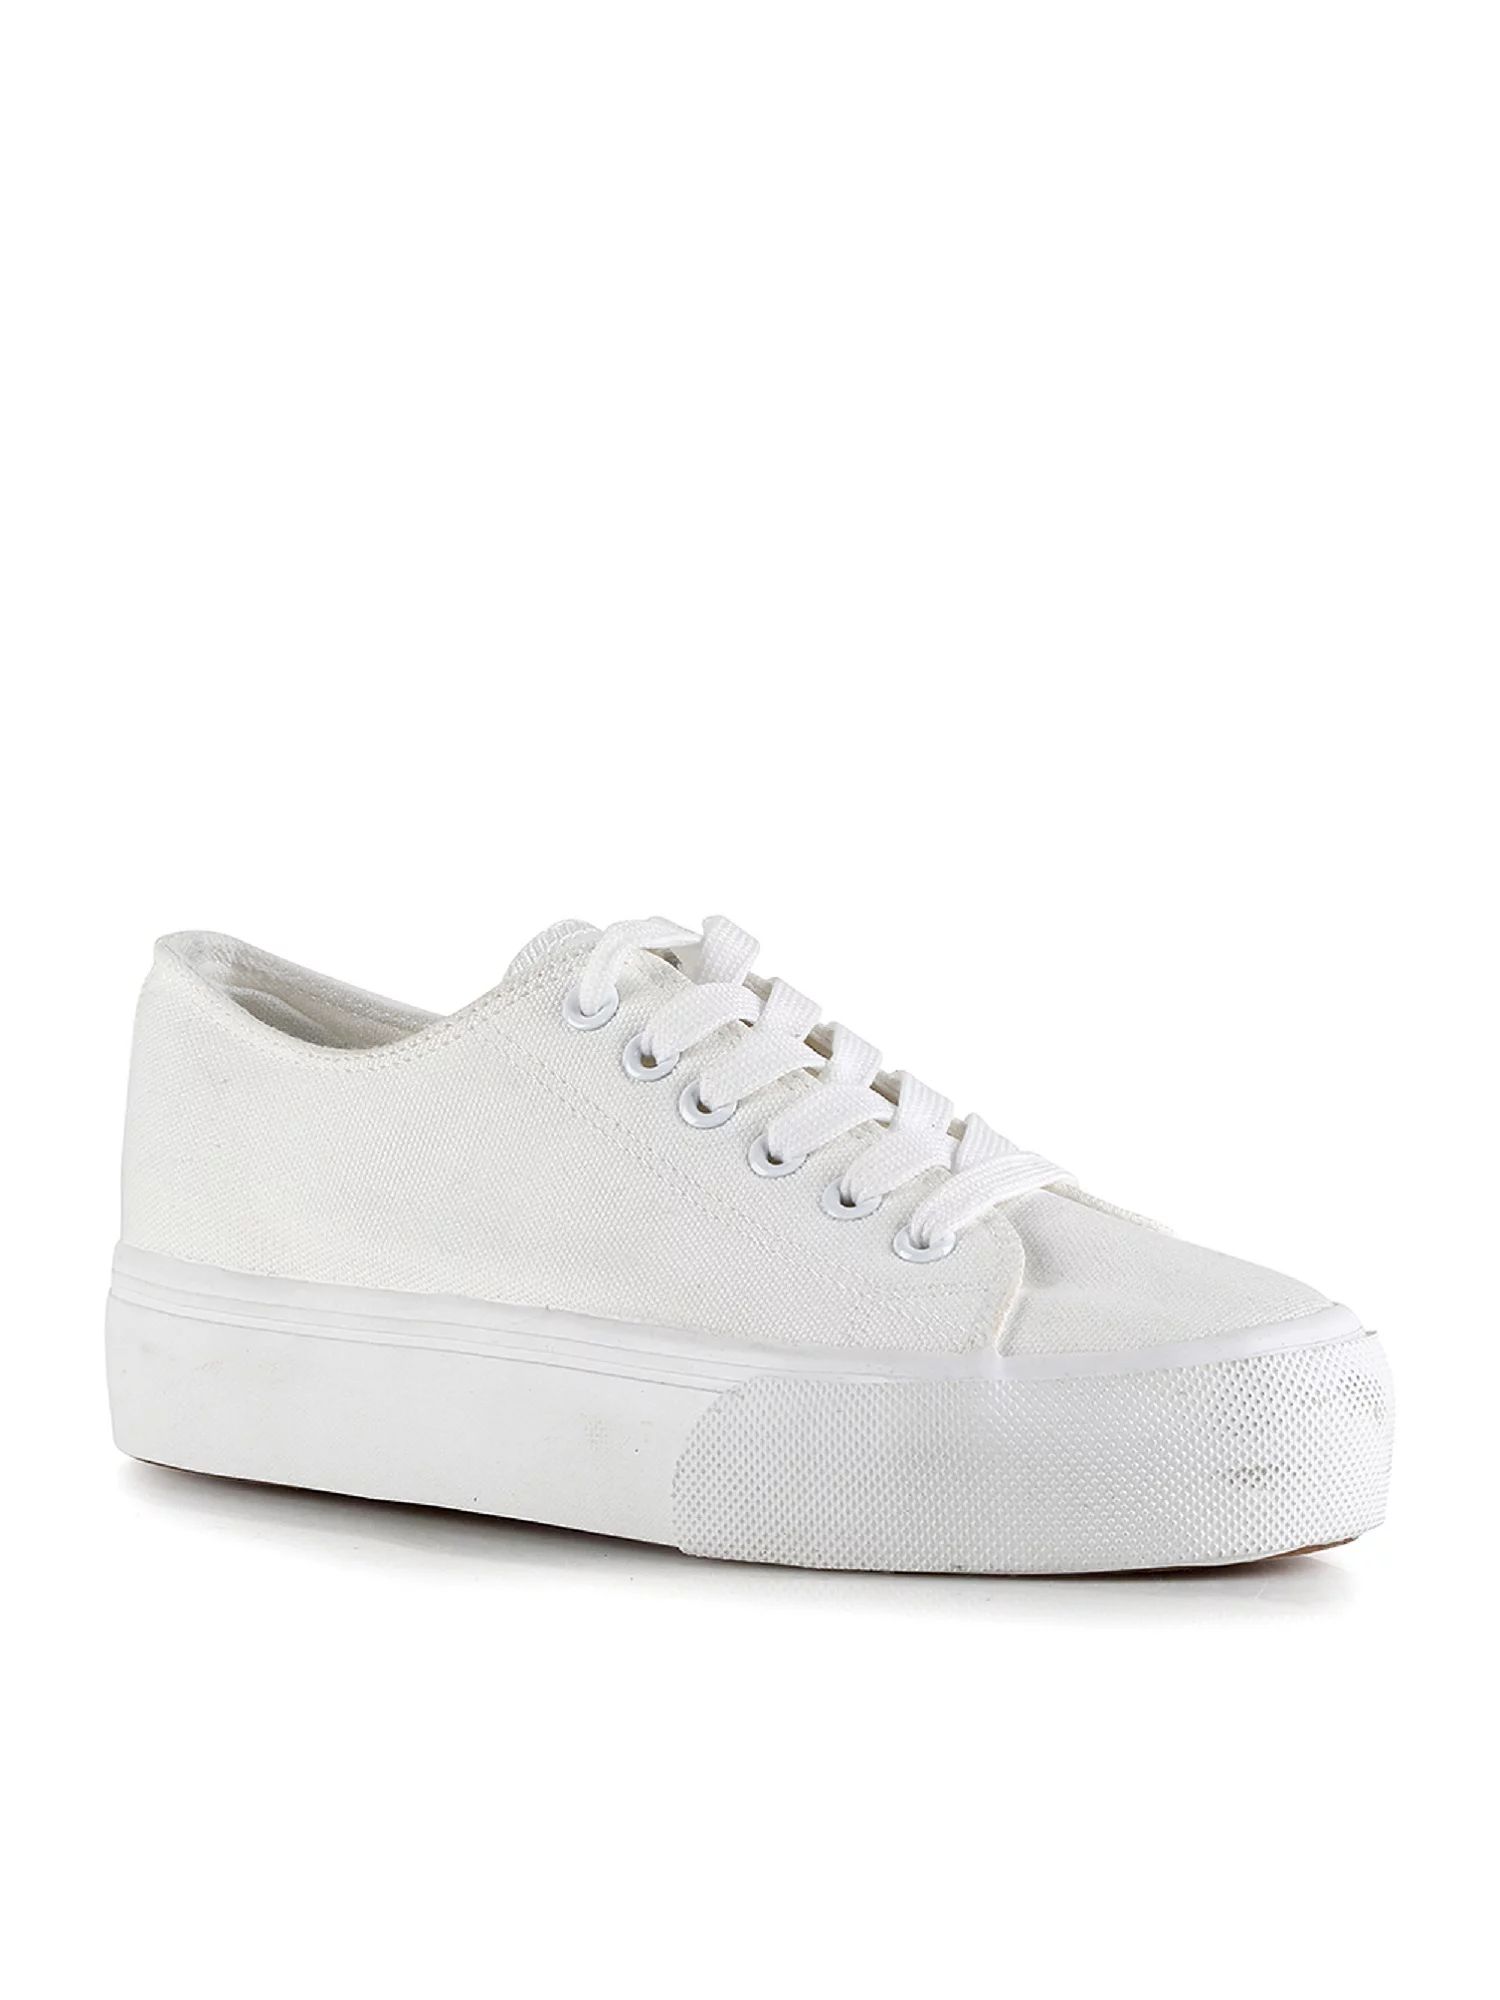 Lace Up Women's Canvas Sneakers in White | Walmart (US)